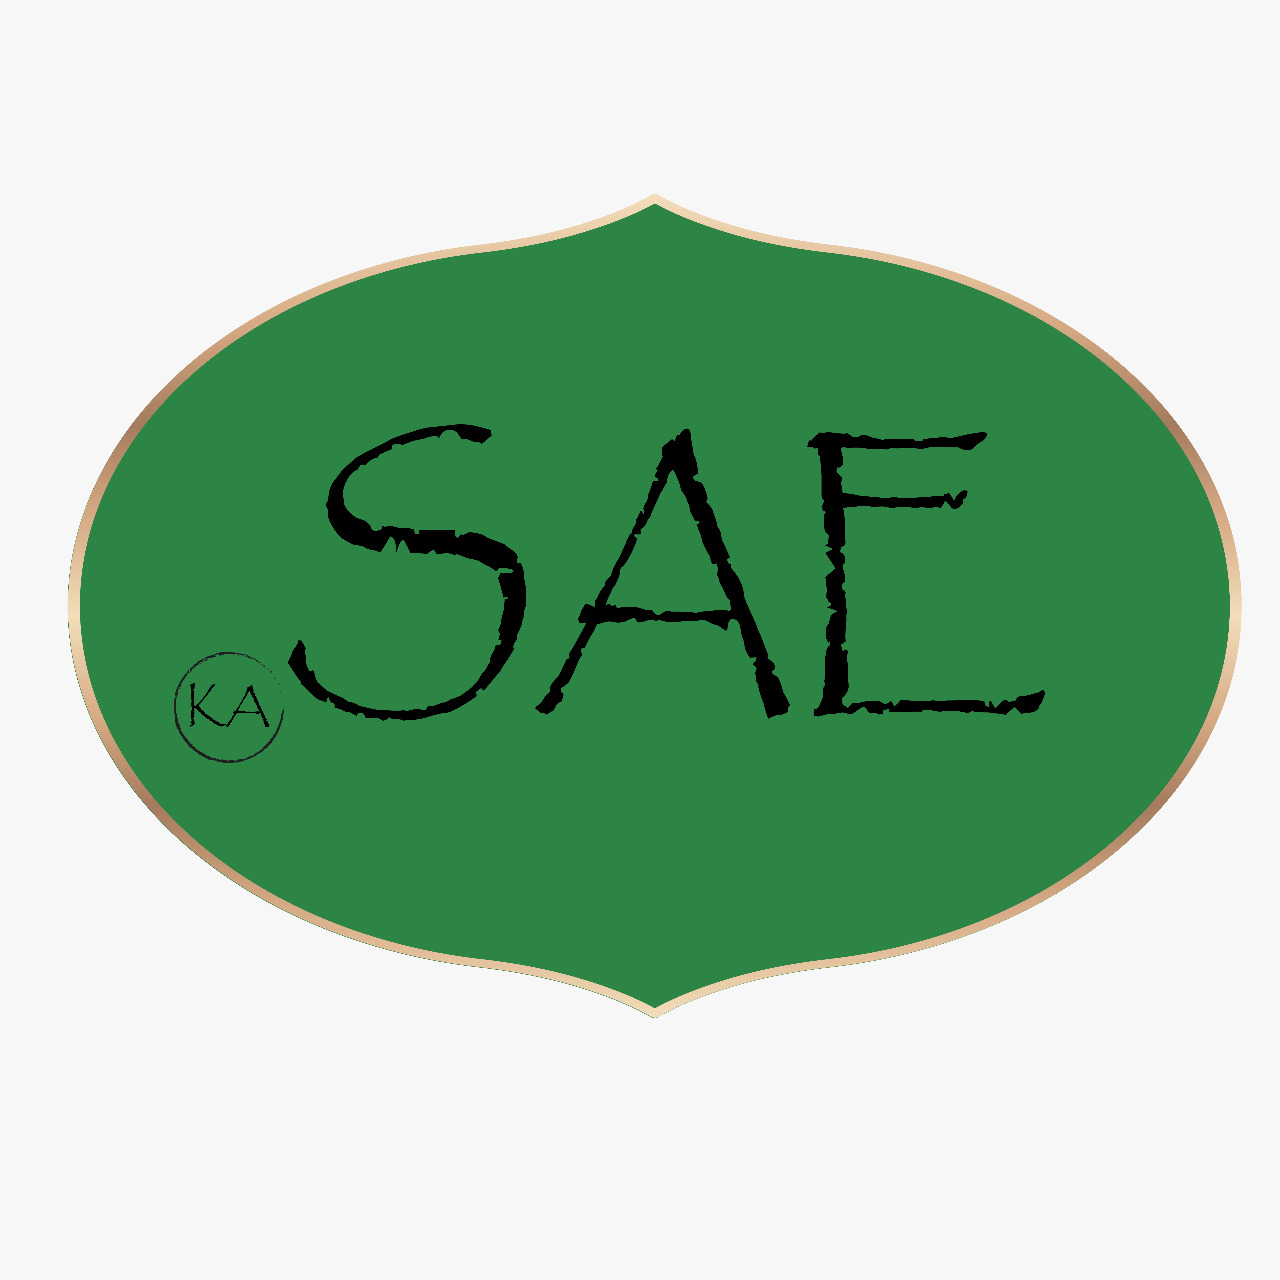 Sae Official Store